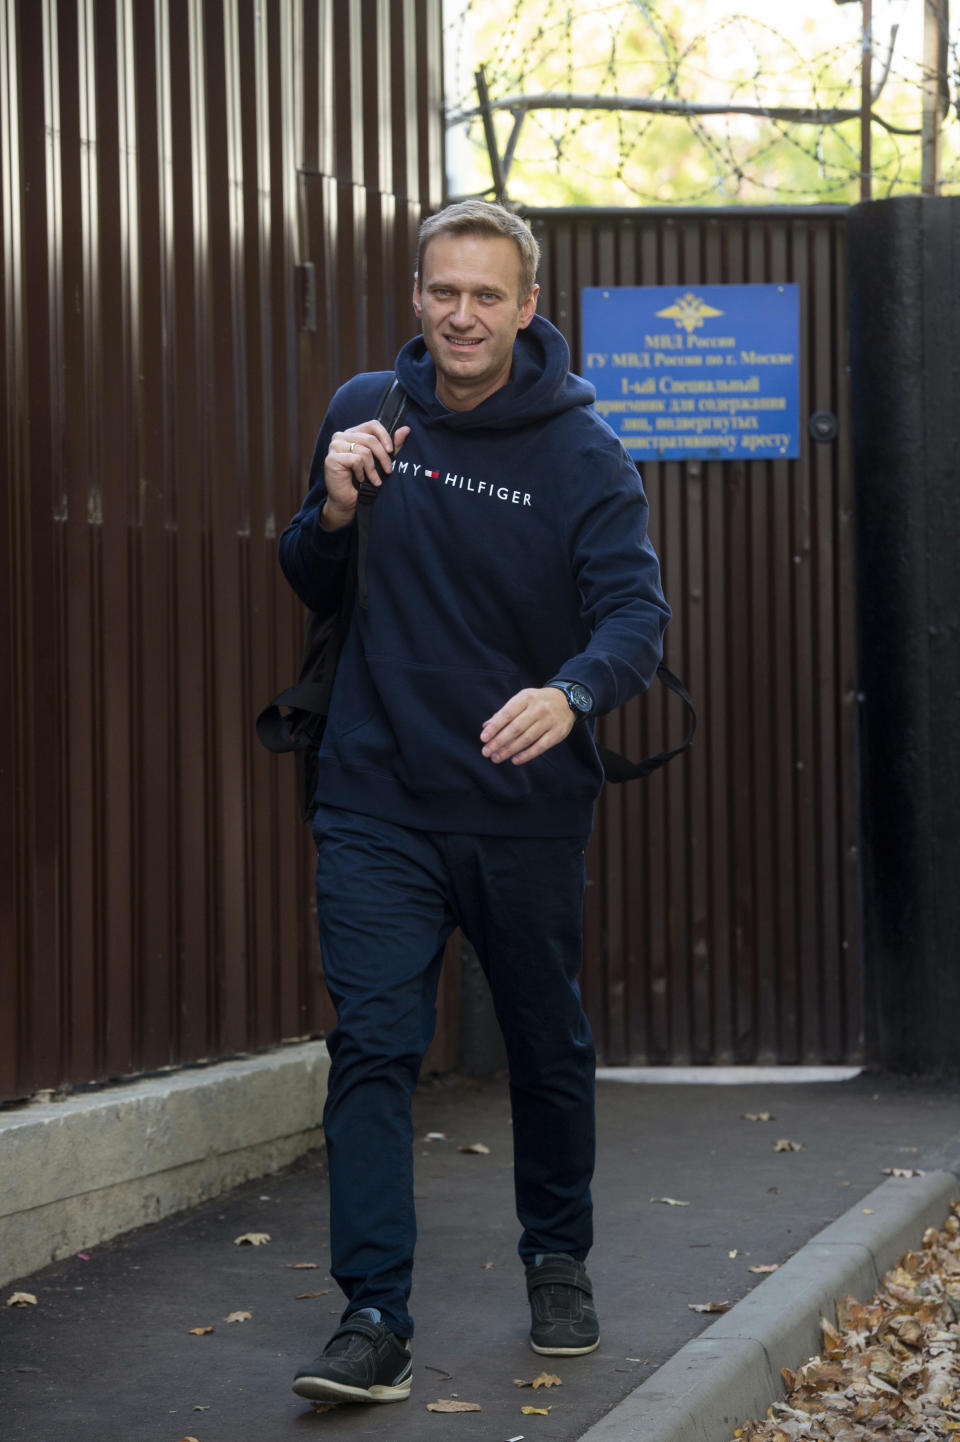 Russian opposition leader Alexei Navalny leaves a detention center after being released, in Moscow, Russia, Friday, Aug. 23, 2019. Navalny, the Kremlin's most prominent foe, was sentenced last month to 30 days for calling on people to take part in an unauthorized protest. (AP Photo/Dmitry Serebryakov)